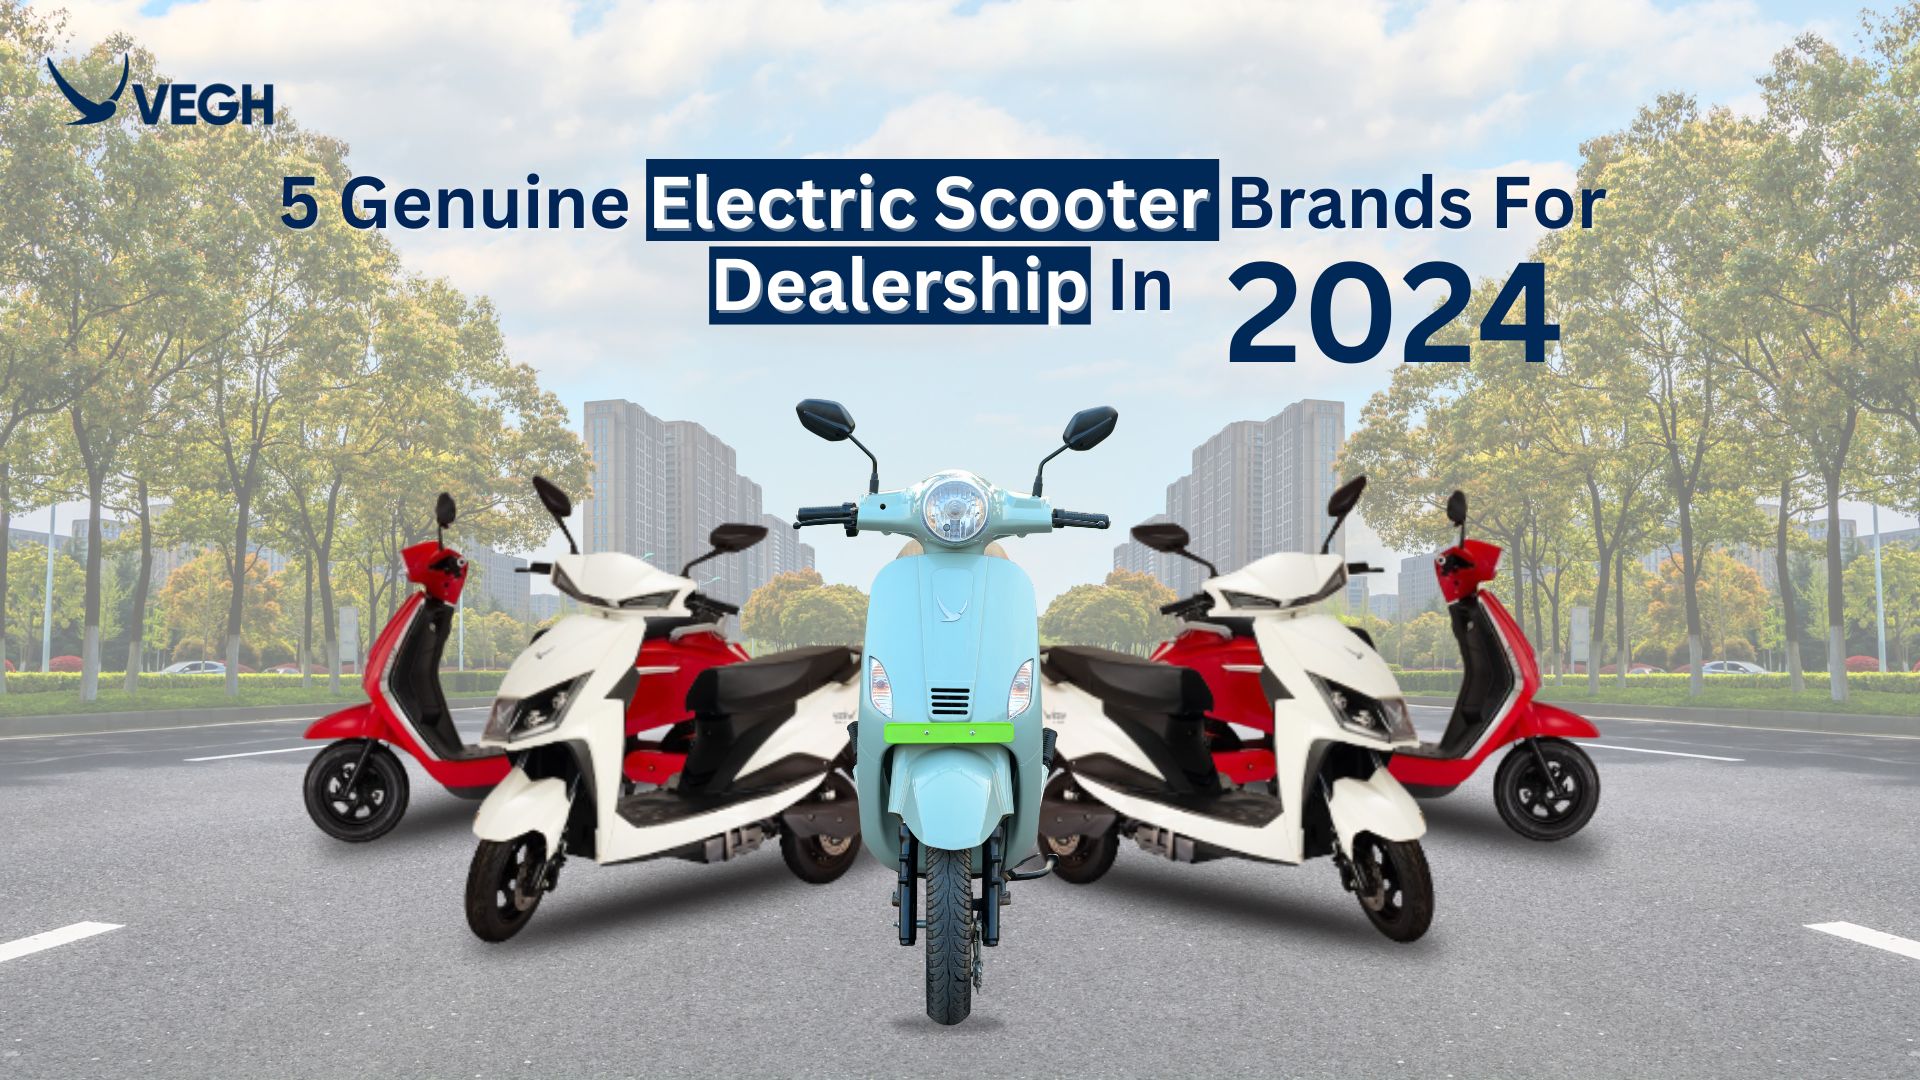 Electric Scootera Dealership